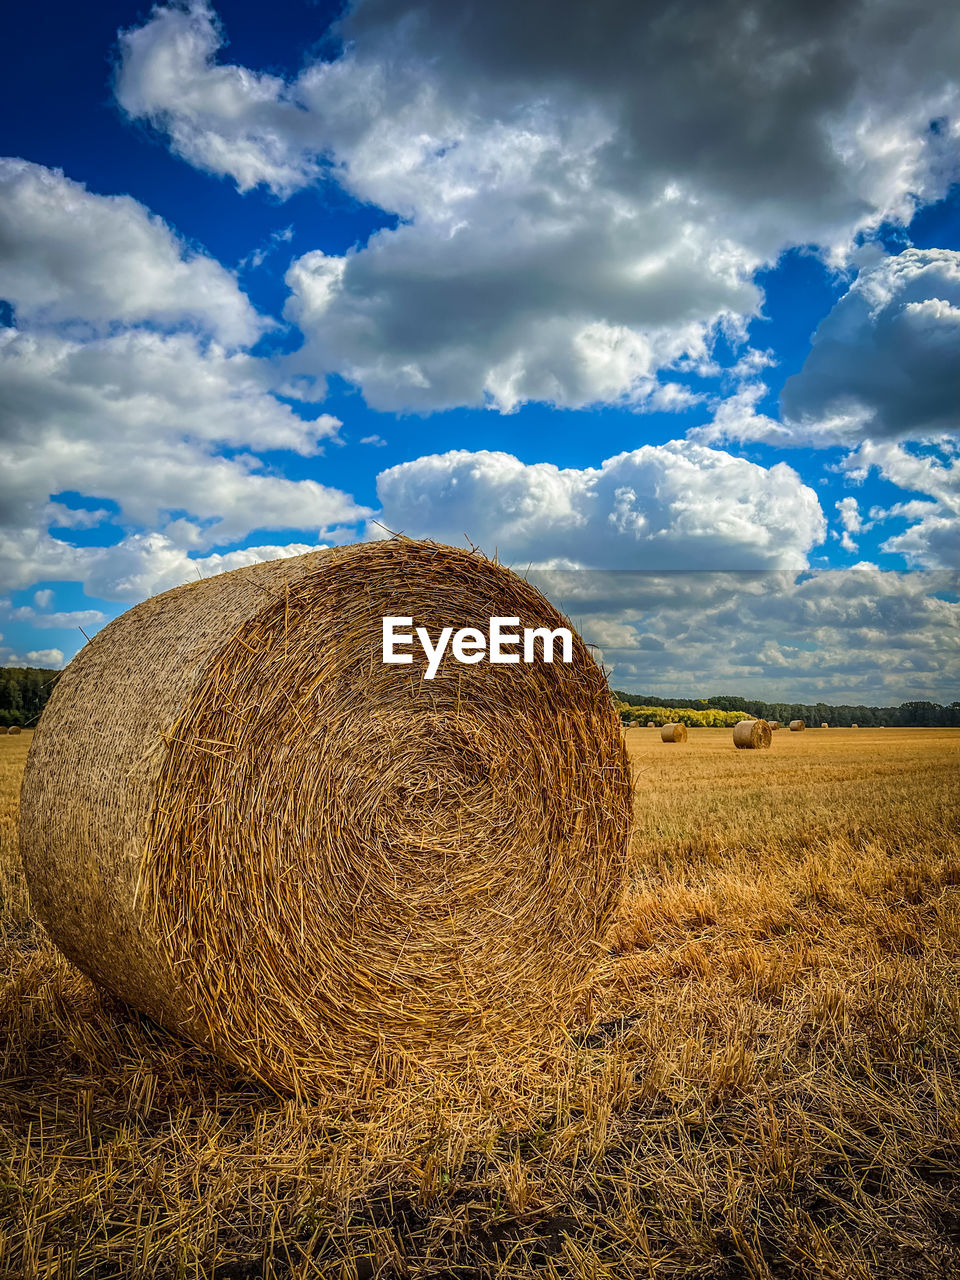 hay, bale, landscape, sky, cloud, agriculture, land, environment, field, rural scene, farm, nature, plant, harvesting, crop, scenics - nature, straw, beauty in nature, rolled up, rural area, grass, cereal plant, tranquility, tranquil scene, circle, haystack, no people, grassland, soil, geometric shape, prairie, summer, outdoors, gold, day, shape, horizon, sunlight, blue, horizon over land, idyllic, meadow